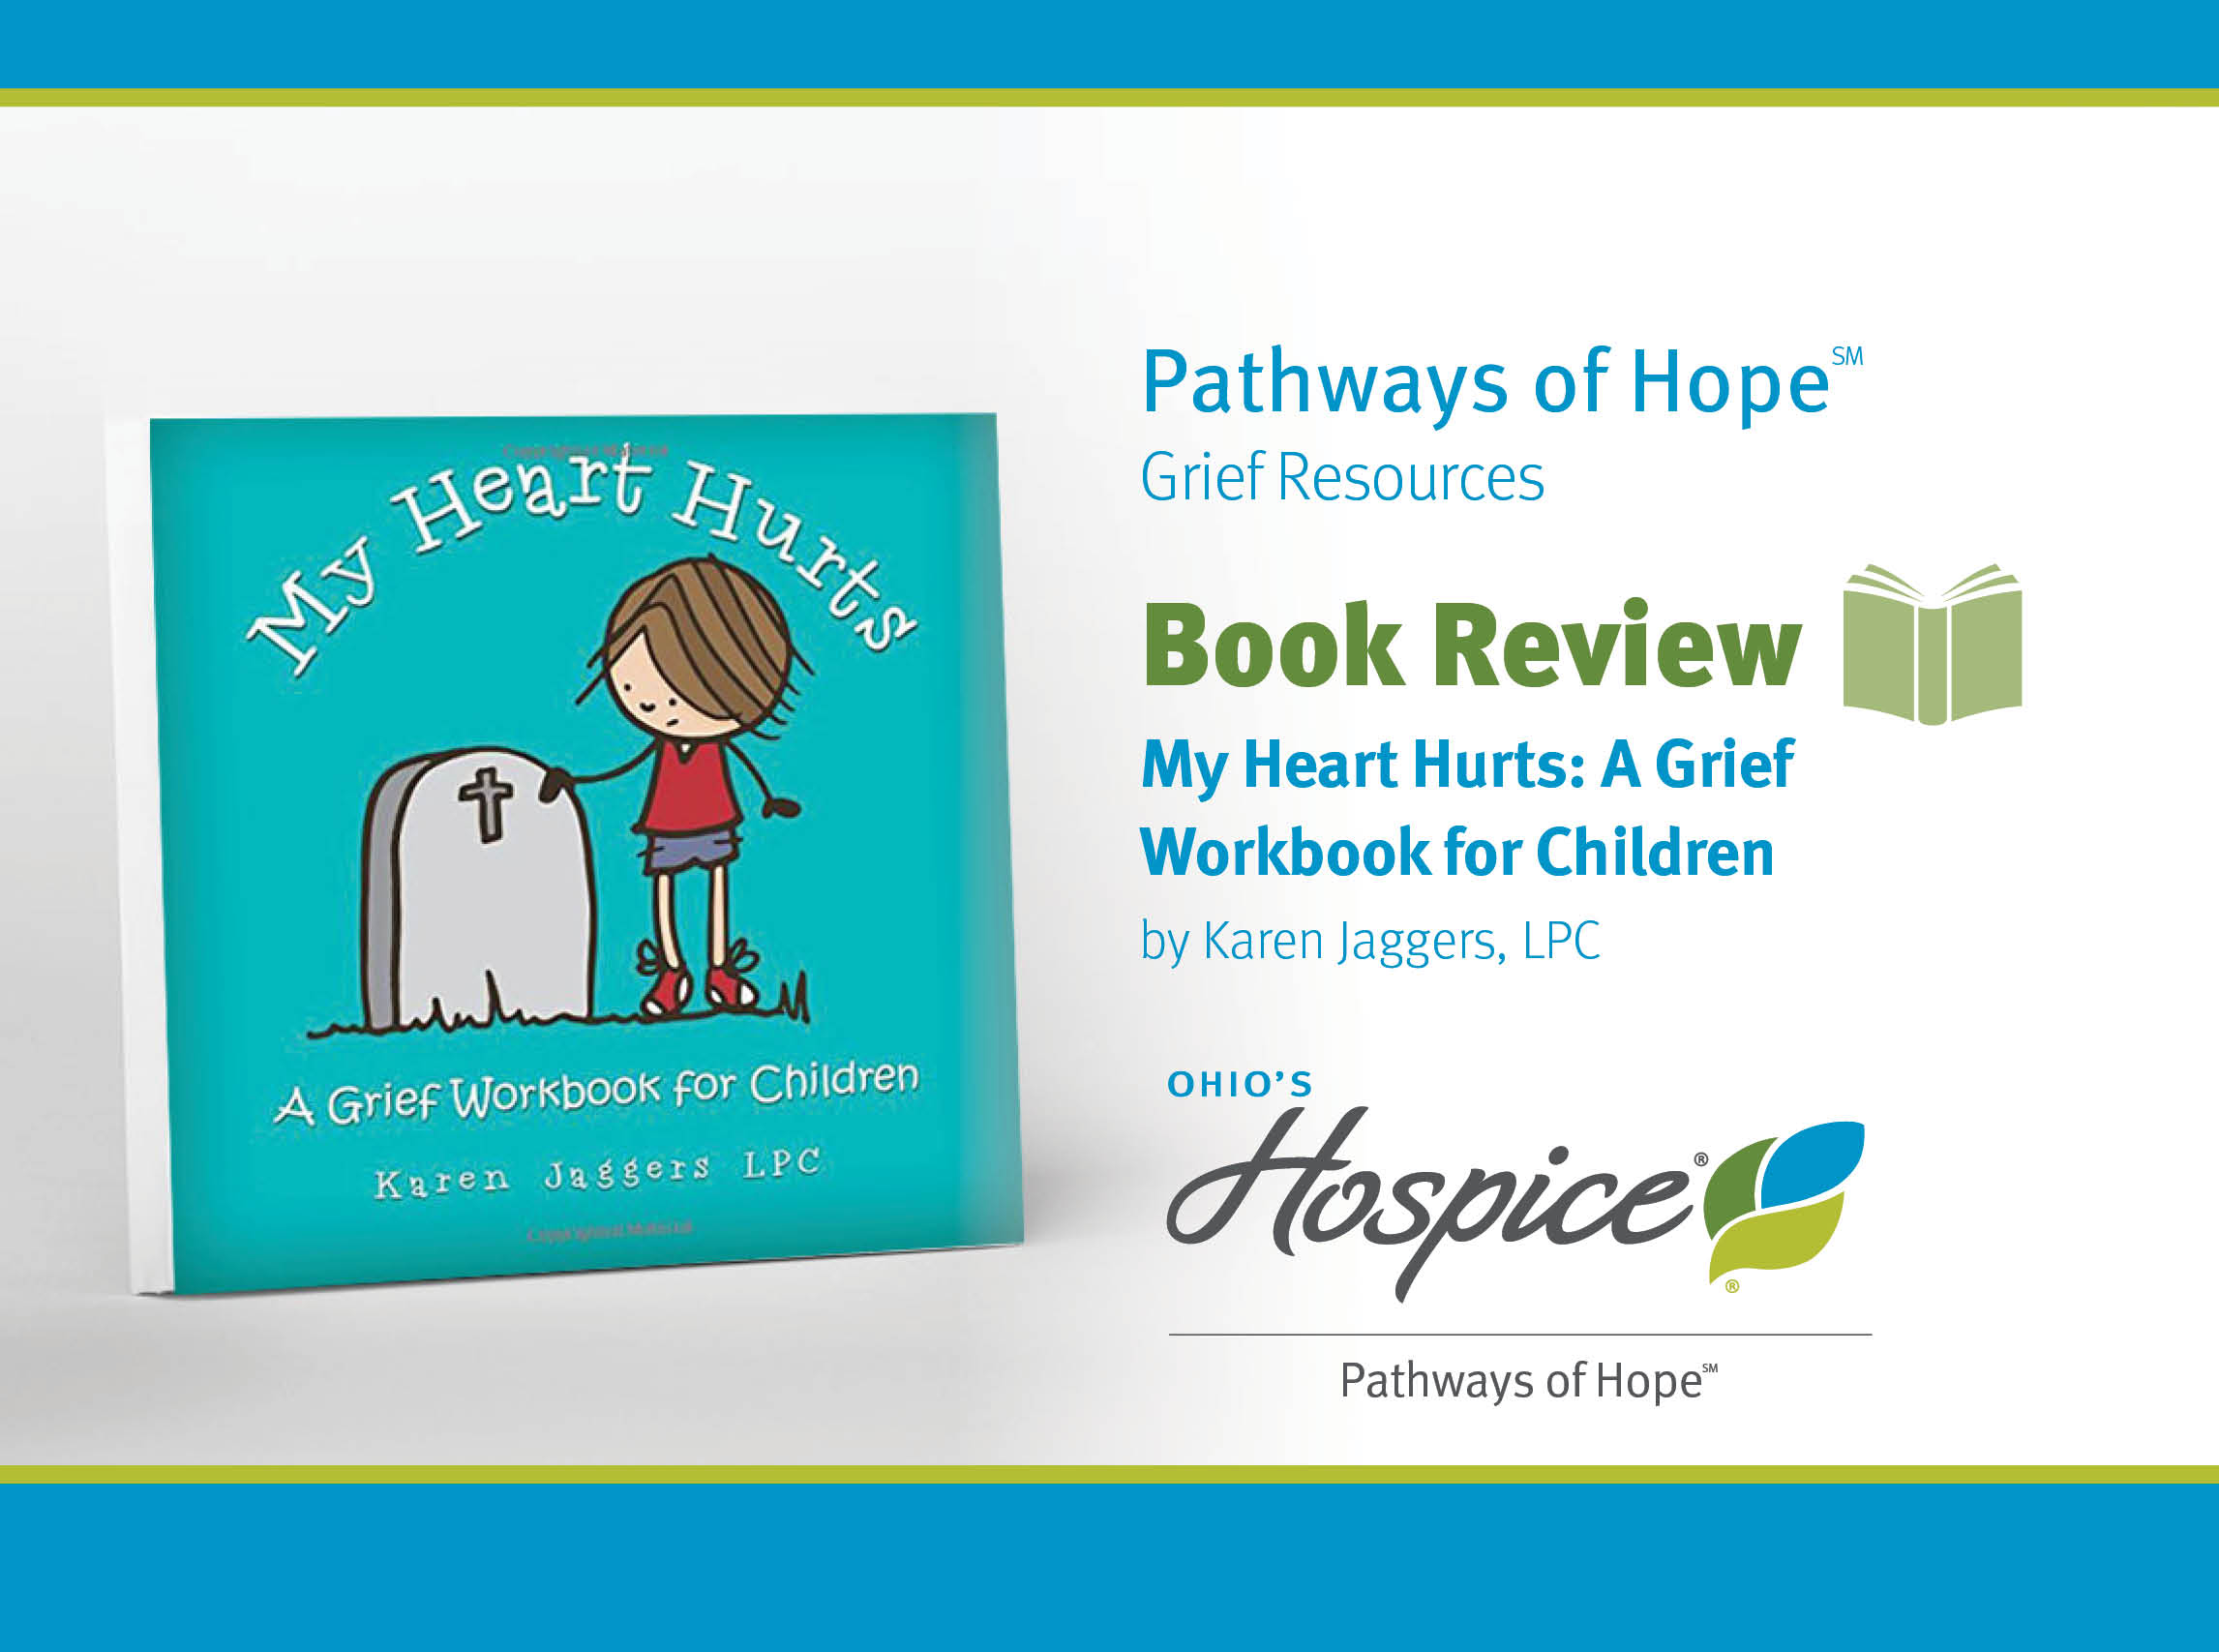 Pathways of Hope Grief Resources. Book Review. My Heart Hurts: A Grief Workbook for Children by Karen Jaggers, LPC. Ohio's Hospice Pathways of Hope